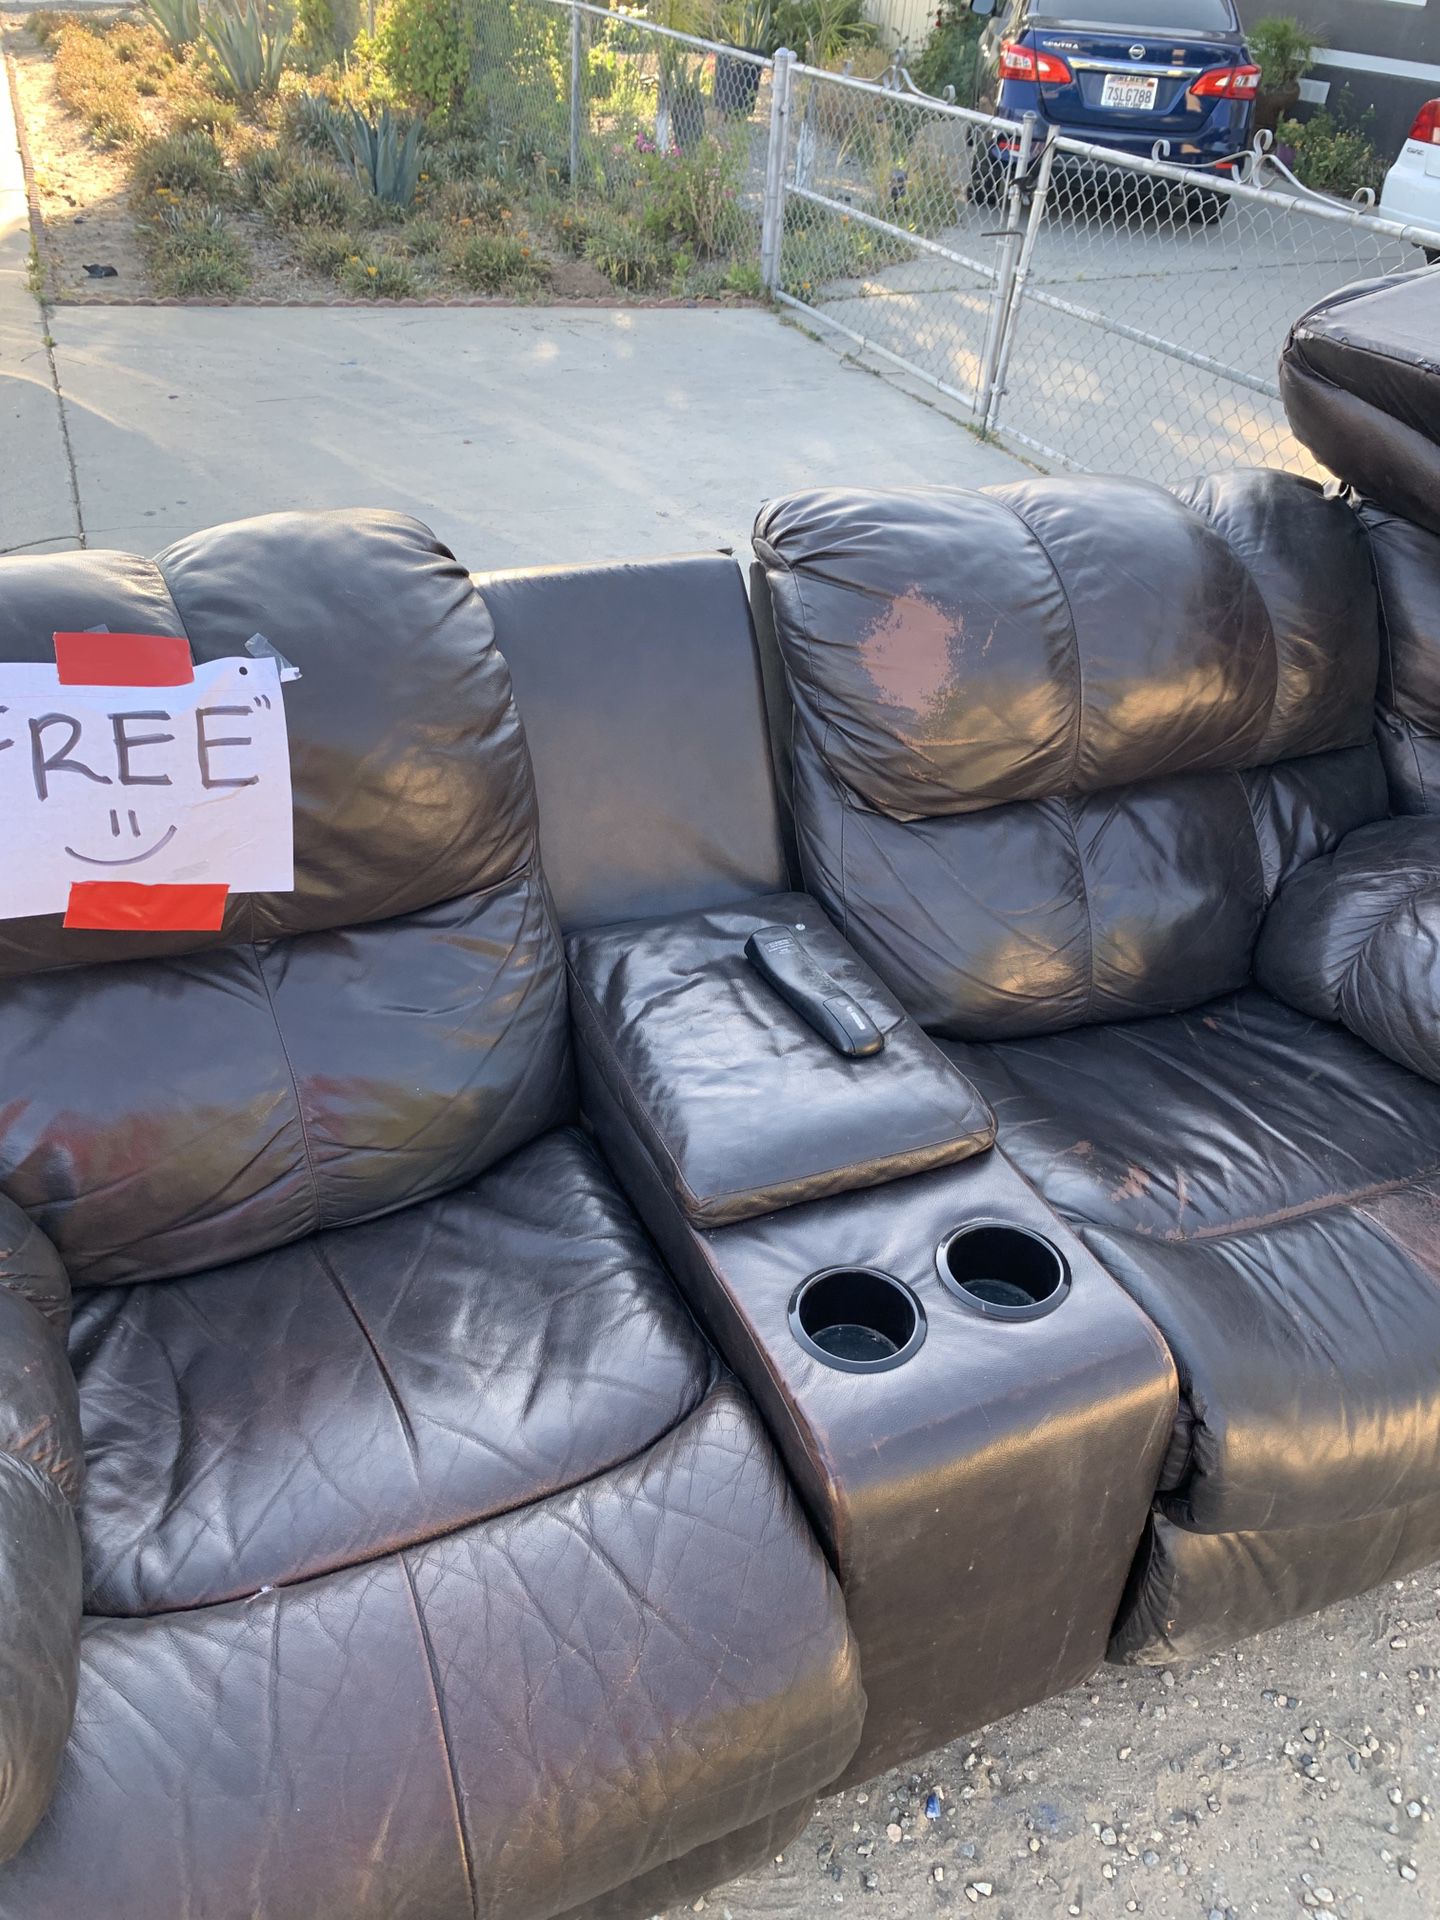 FREE COUCHES